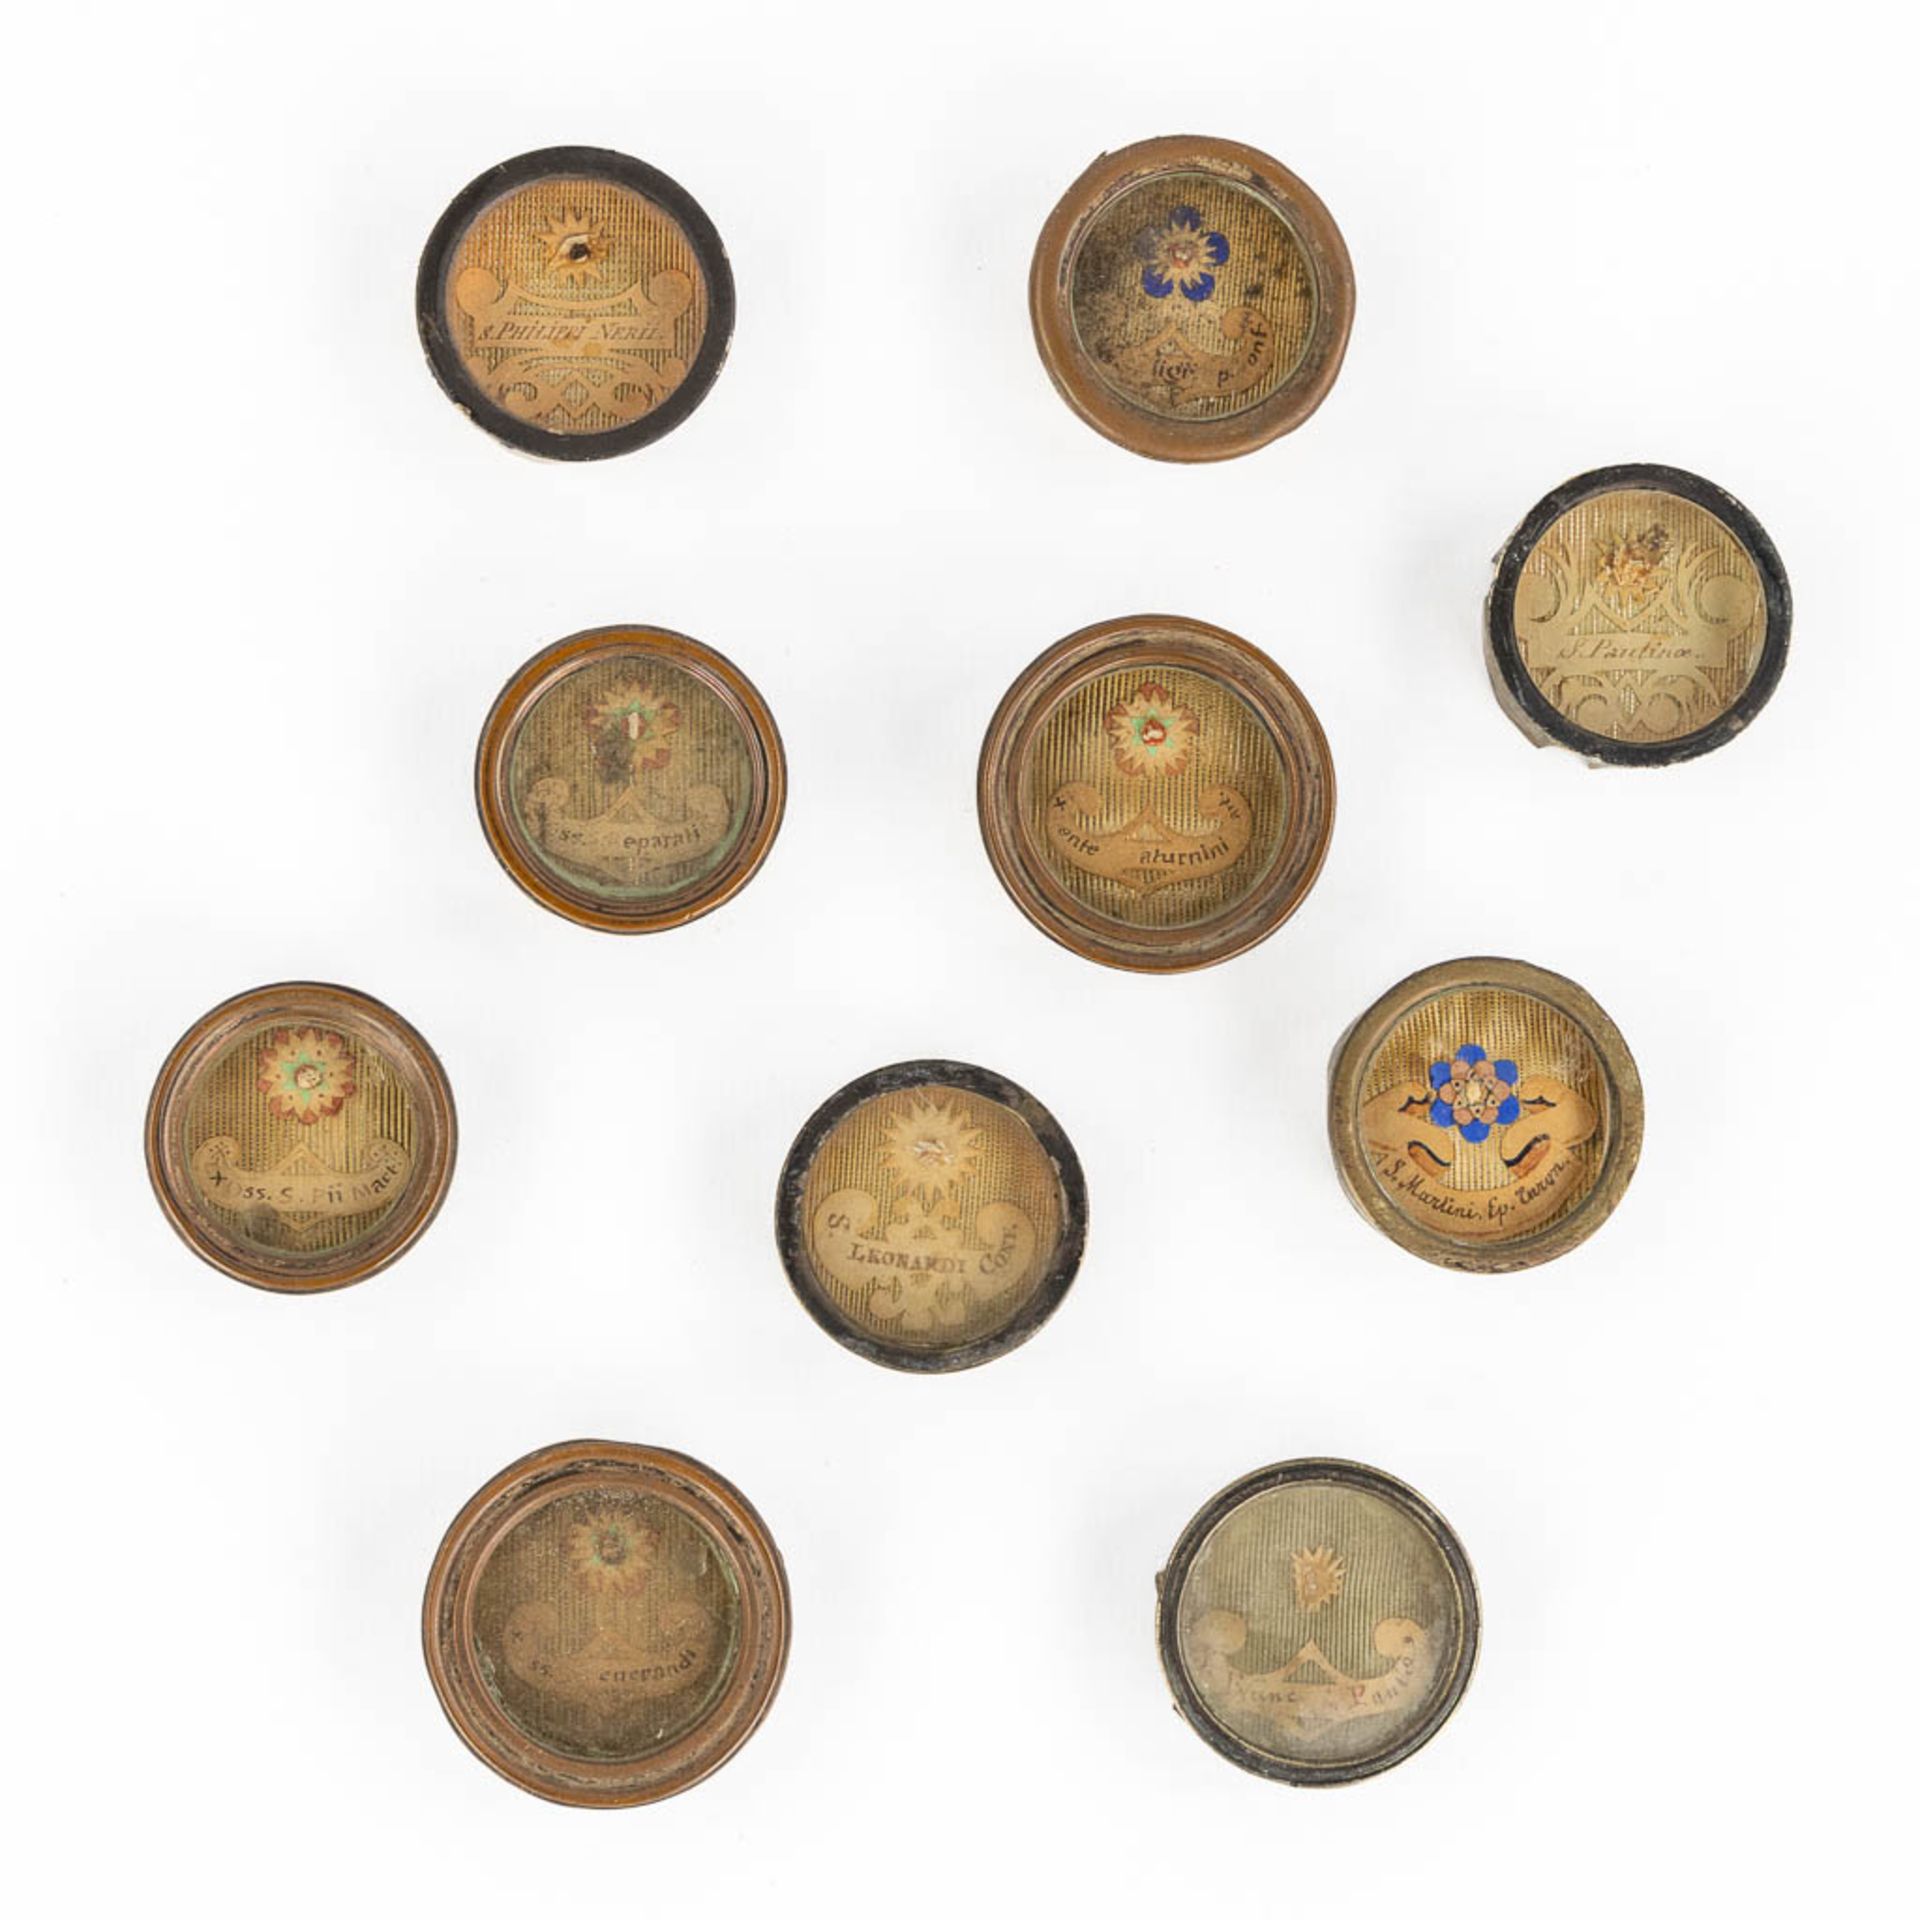 10 sealed theca with various relics. Saint Venerand, Philip Neri, Eligius and others.